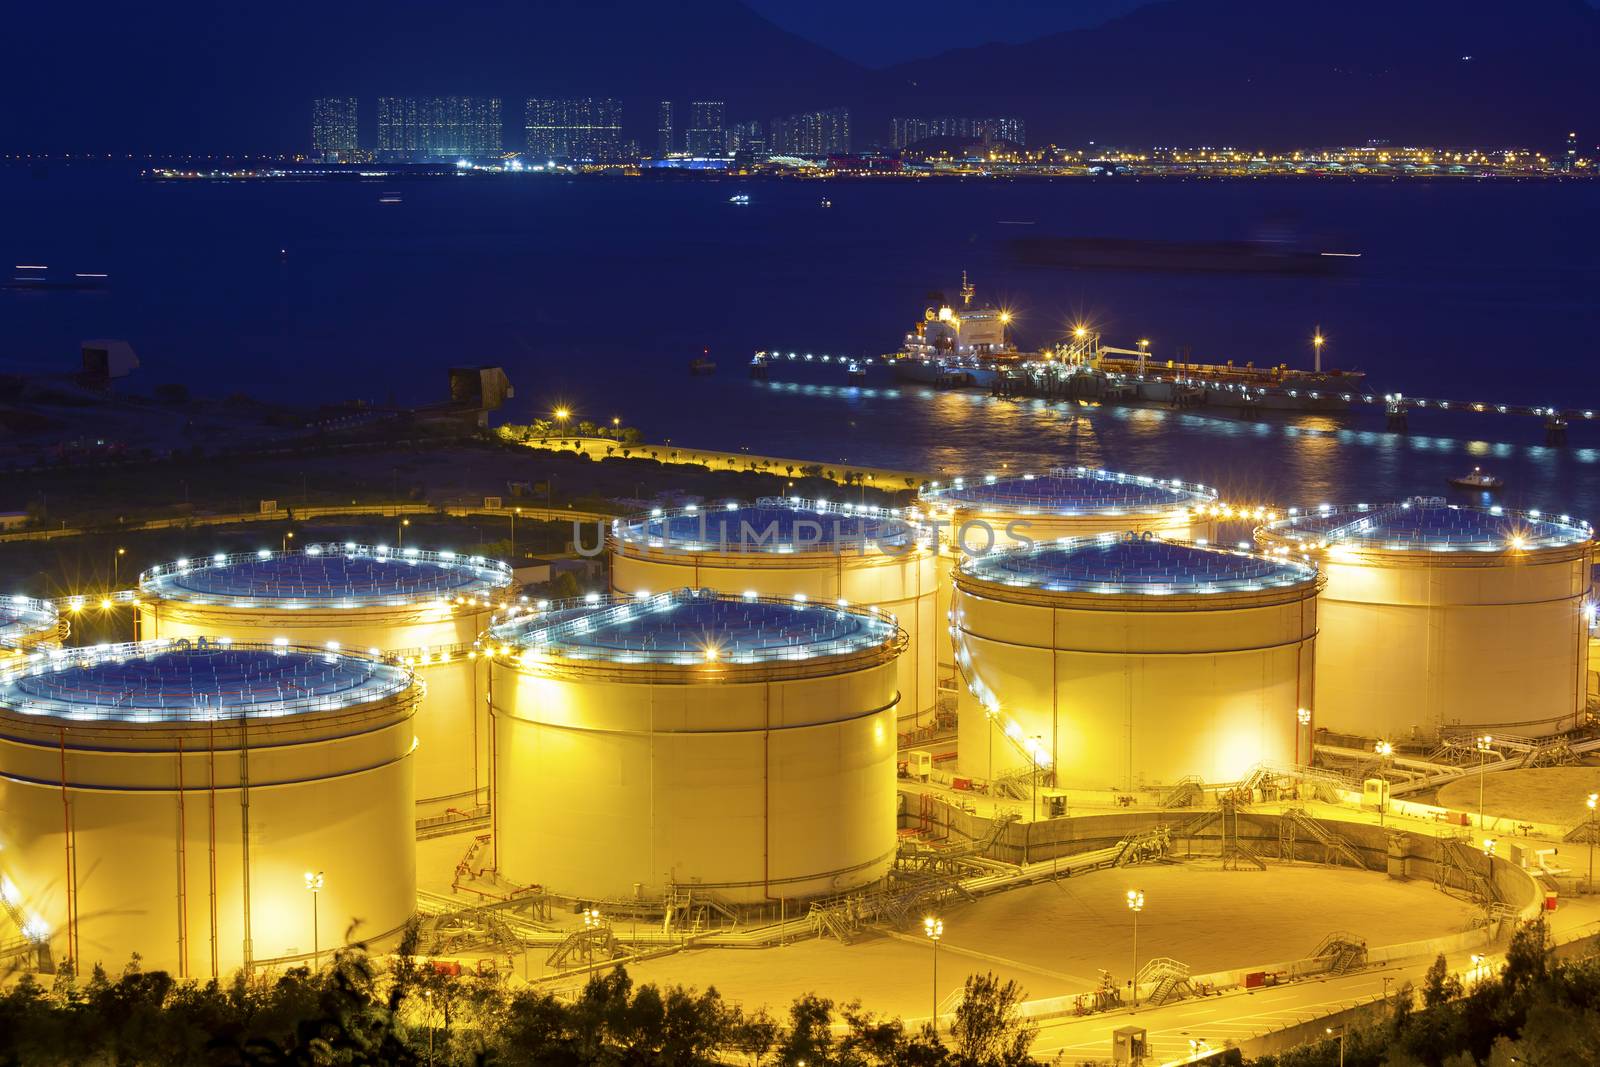 Big Industrial oil tanks in a refinery at night by kawing921